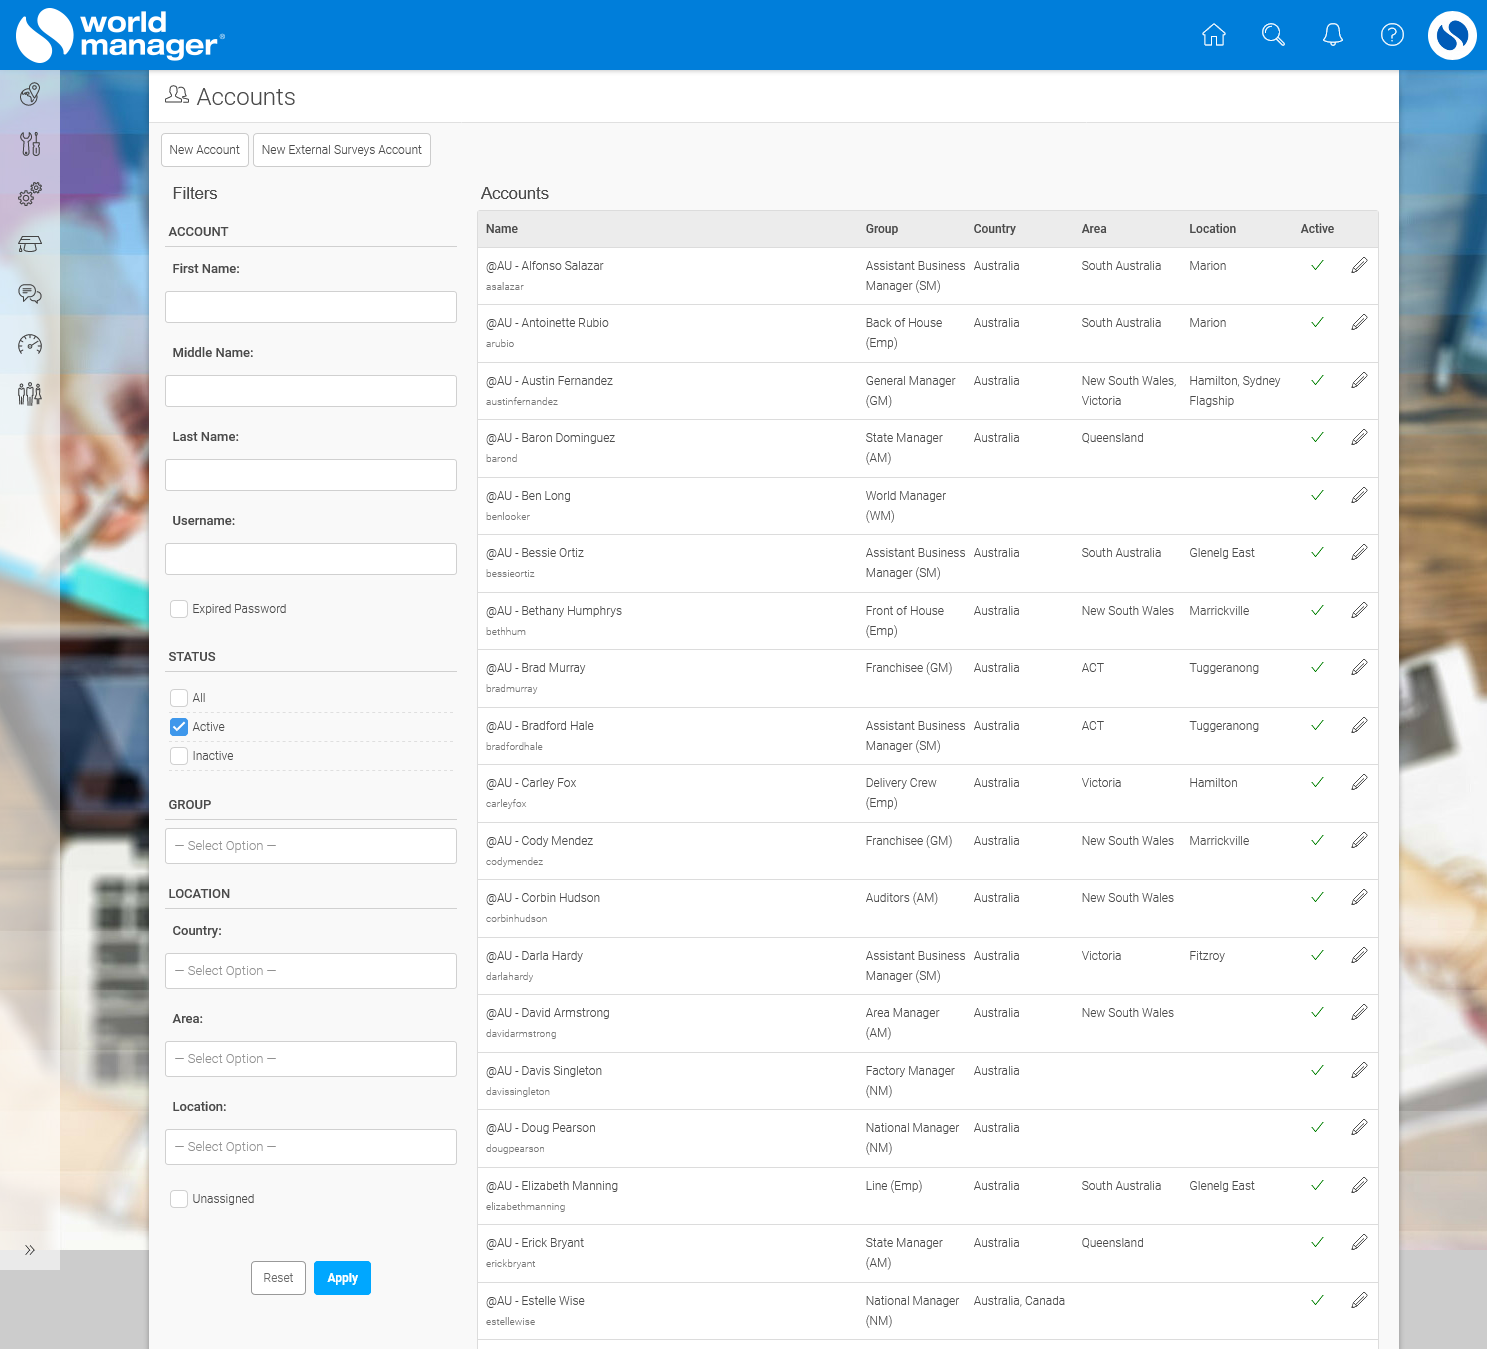 Example view of the Accounts tool for World Managers